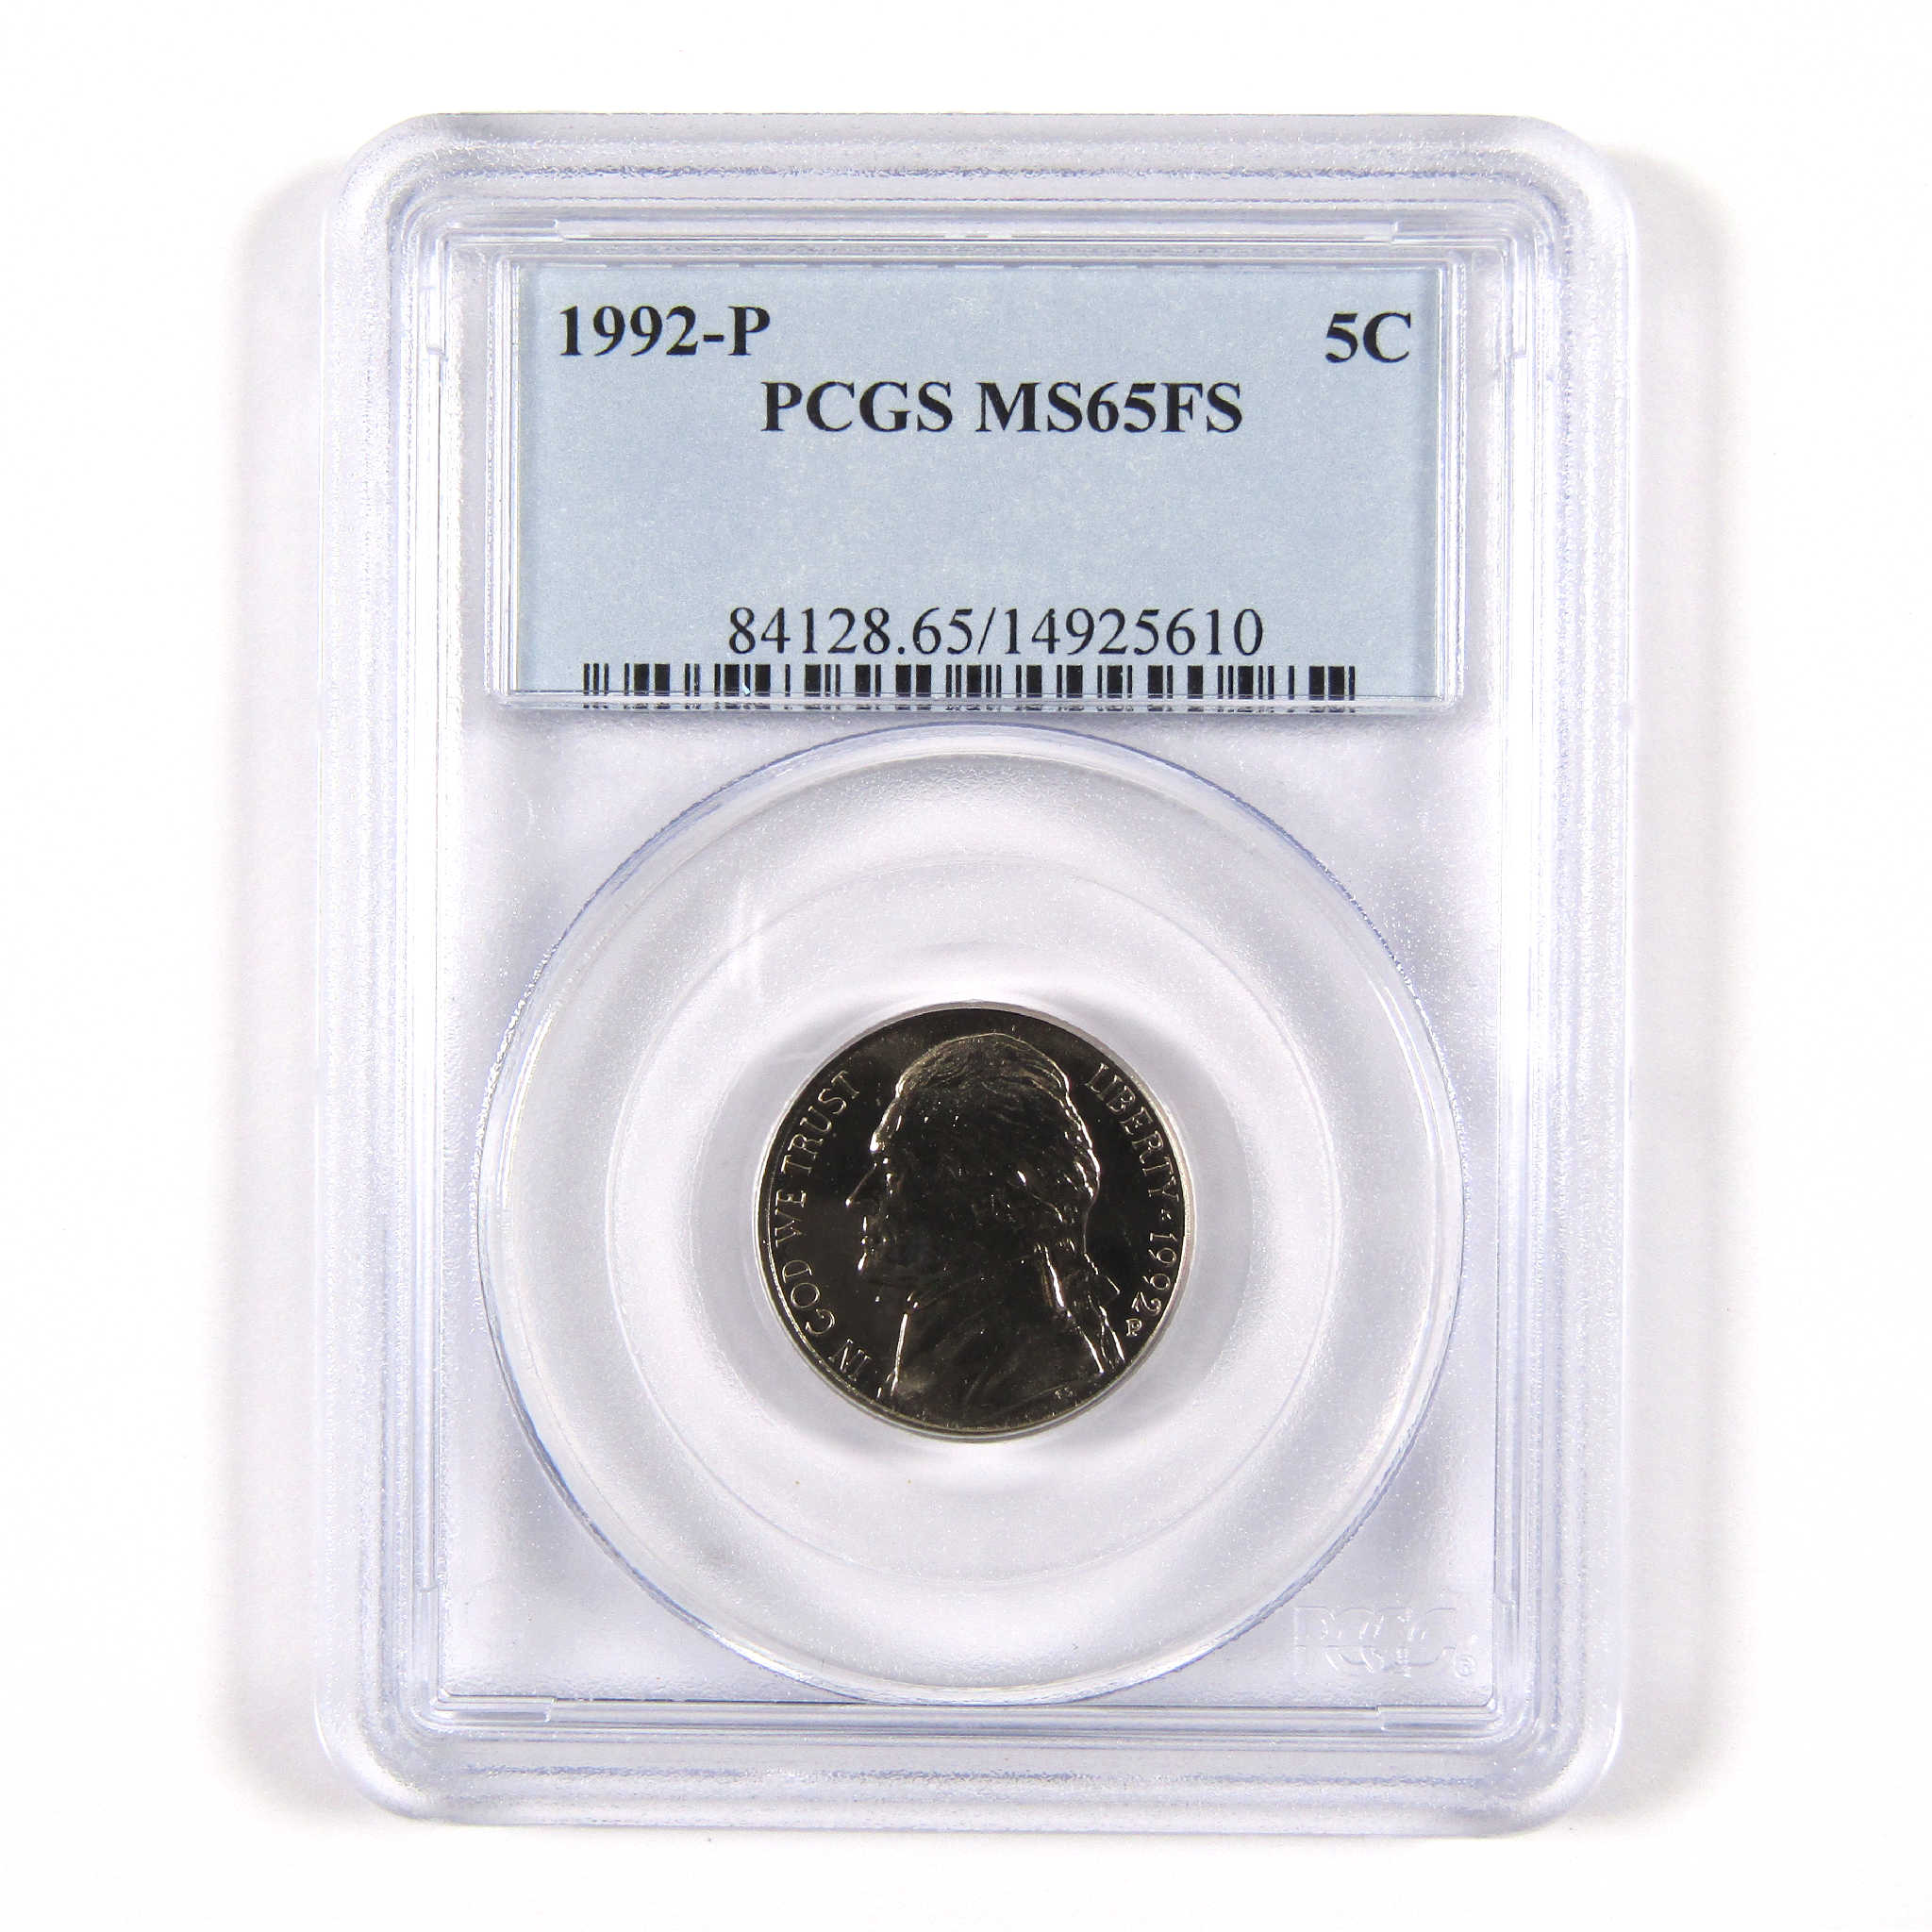 1992 P Jefferson Nickel MS 65 FS PCGS 5c Uncirculated Coin SKU:CPC4125